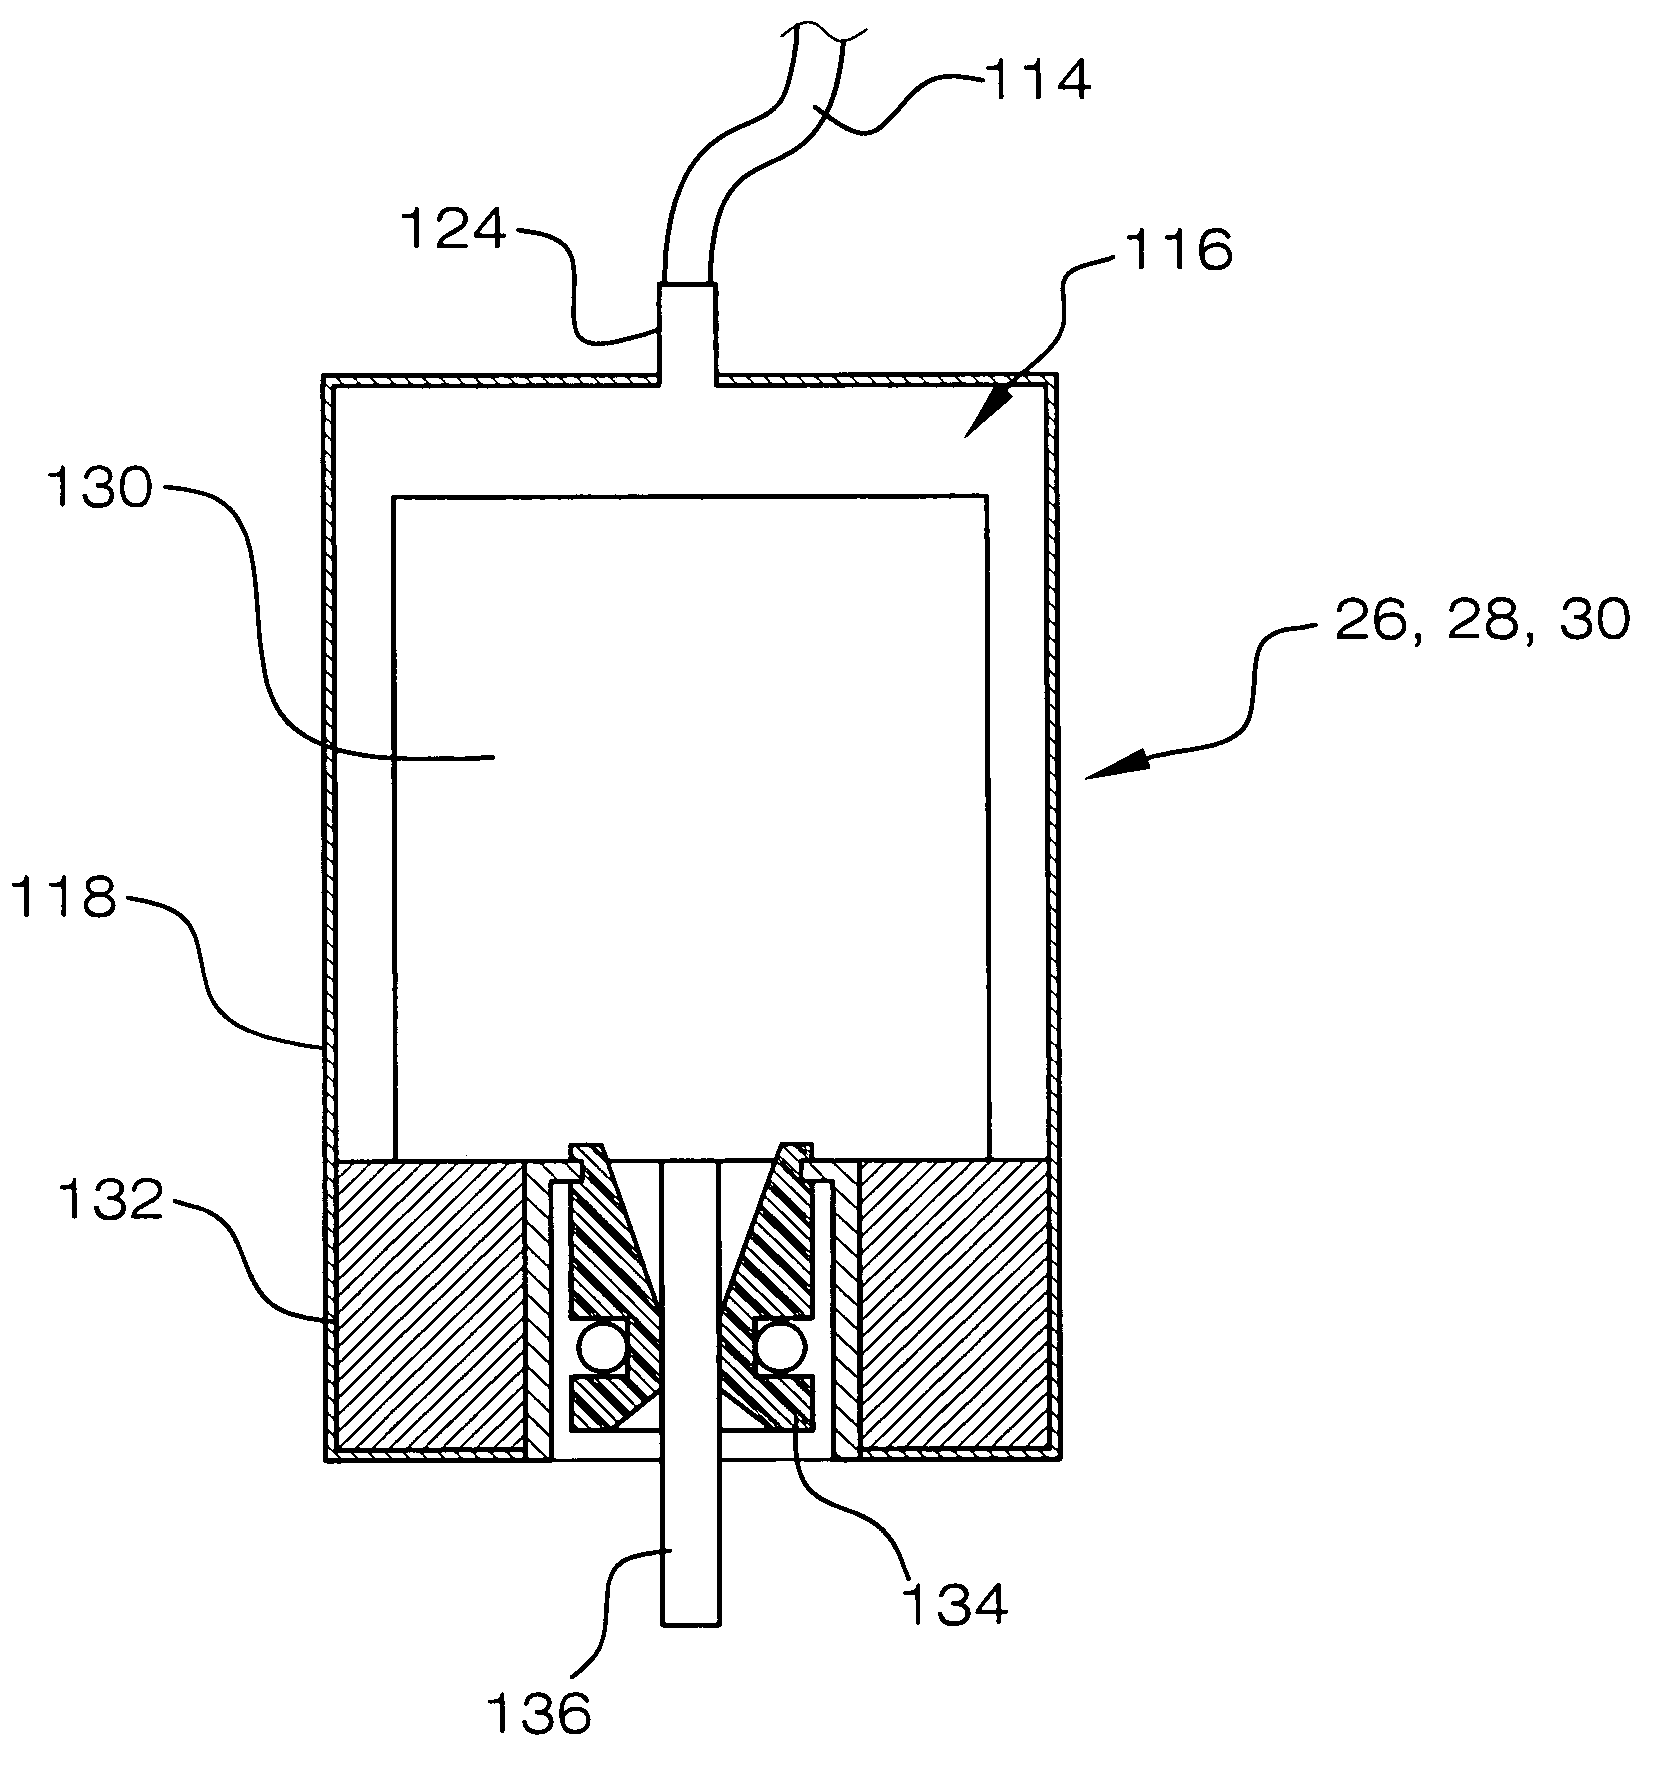 Shaft seal pressure compensation system for an underwater device